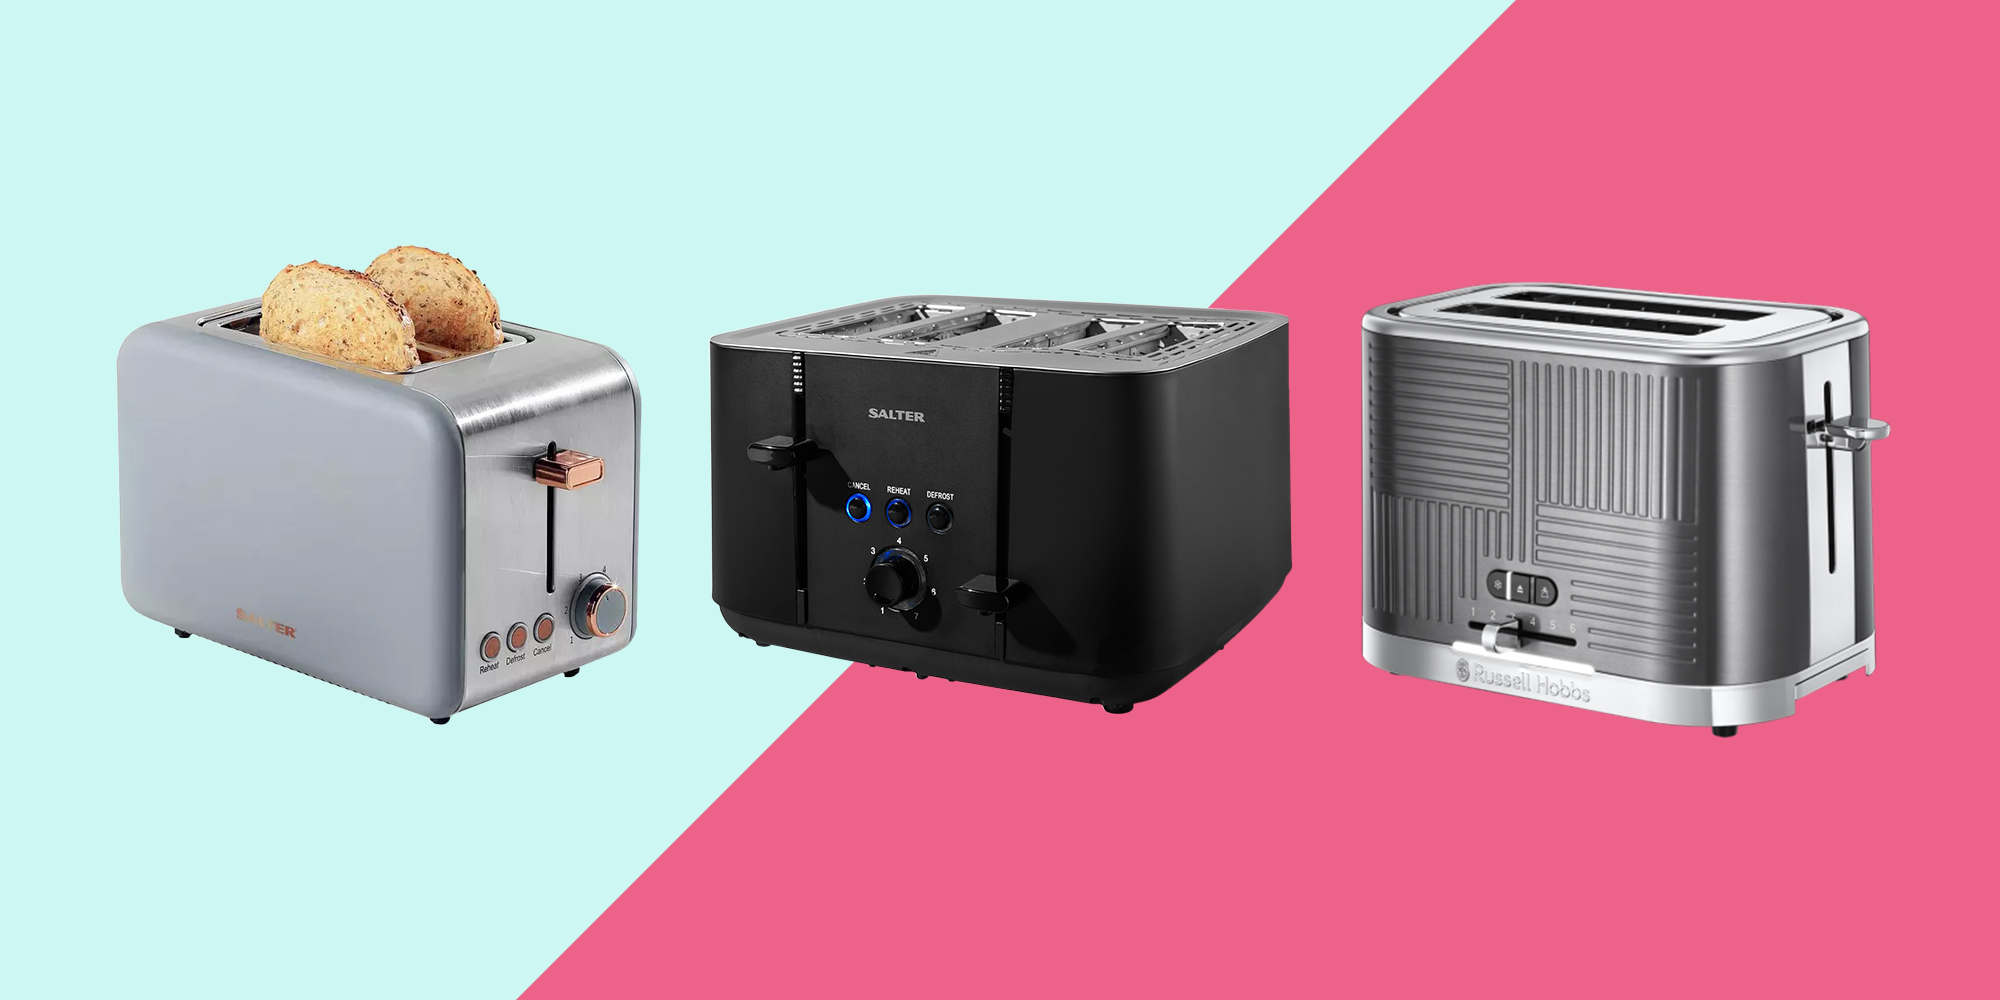 Best toasters for 2023, according to our expert tester